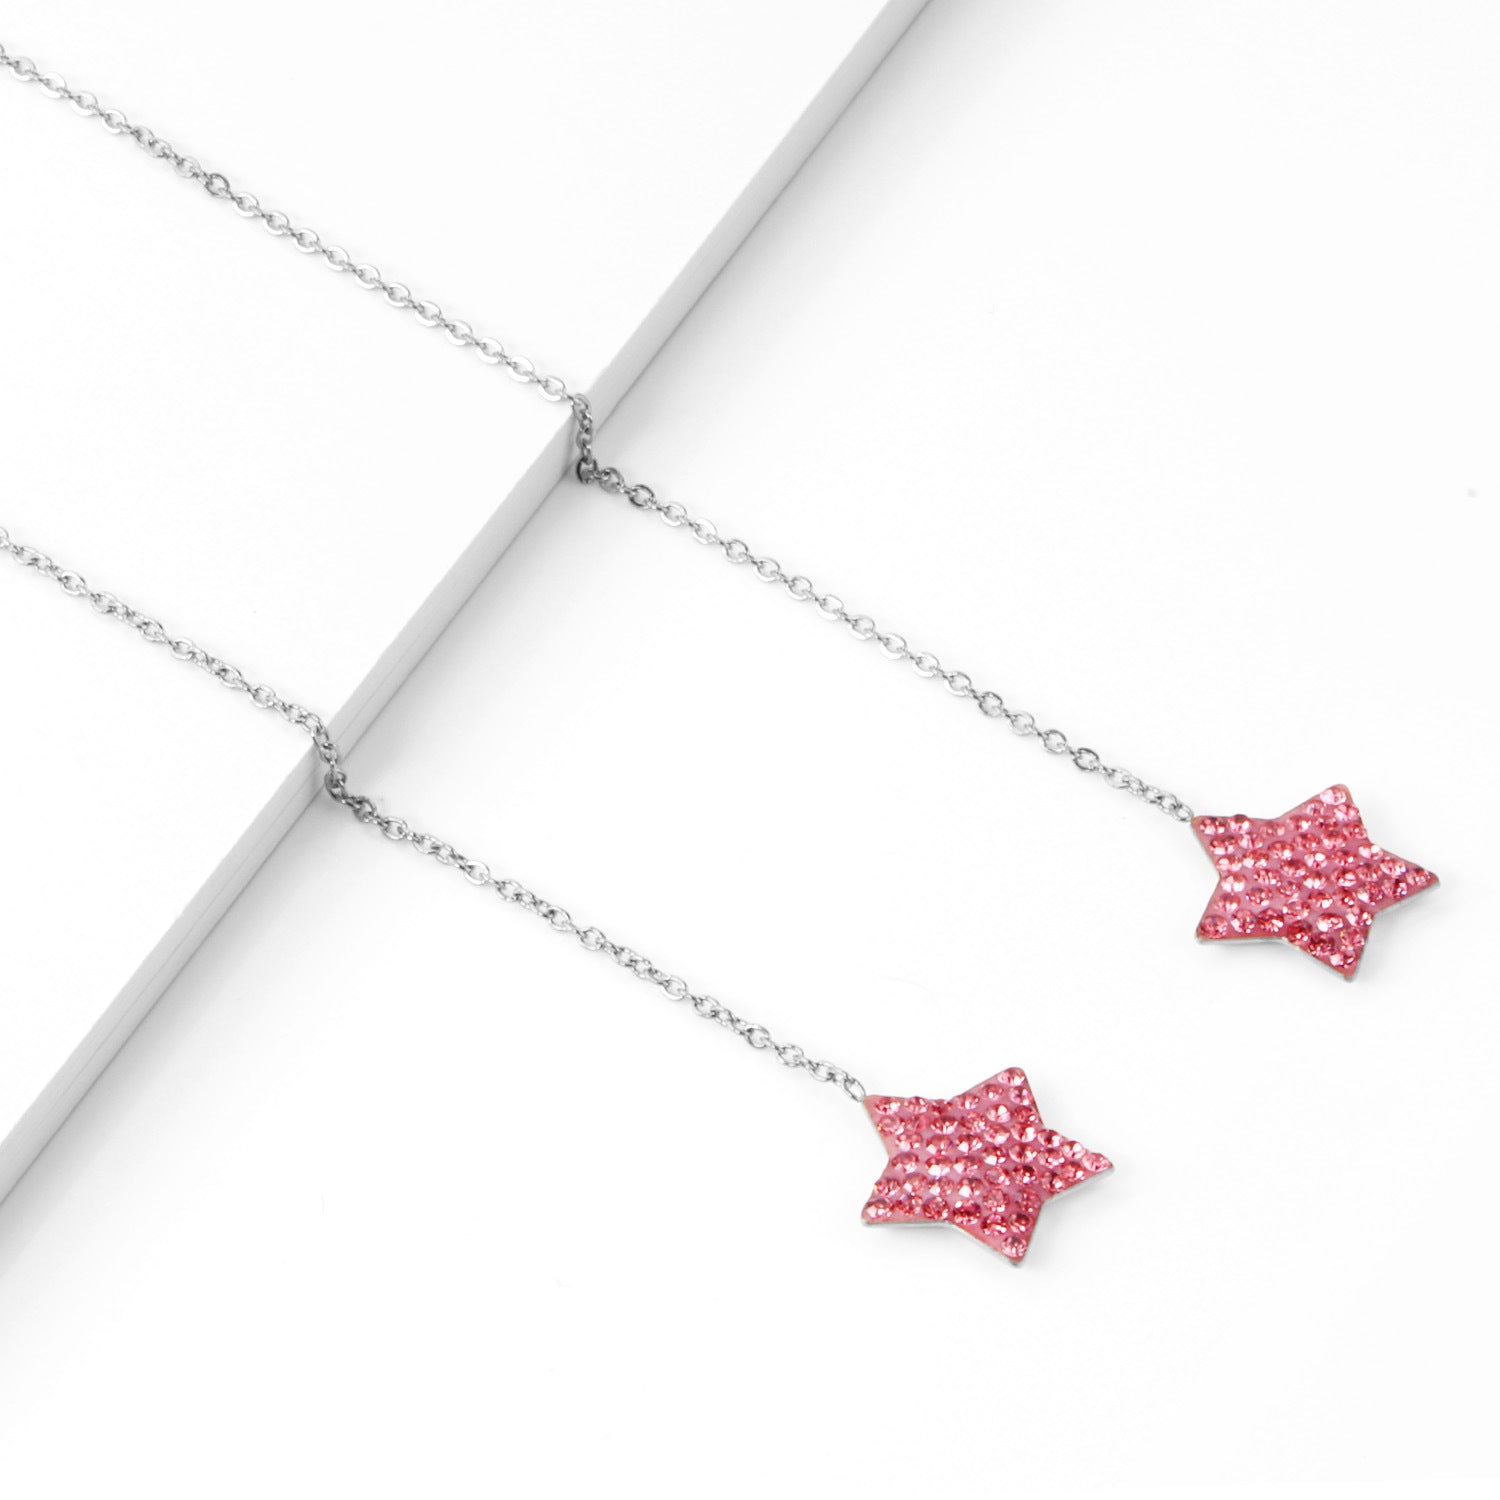 Pink Cubic Zirconia & Silver-Plated Star Threader Earrings